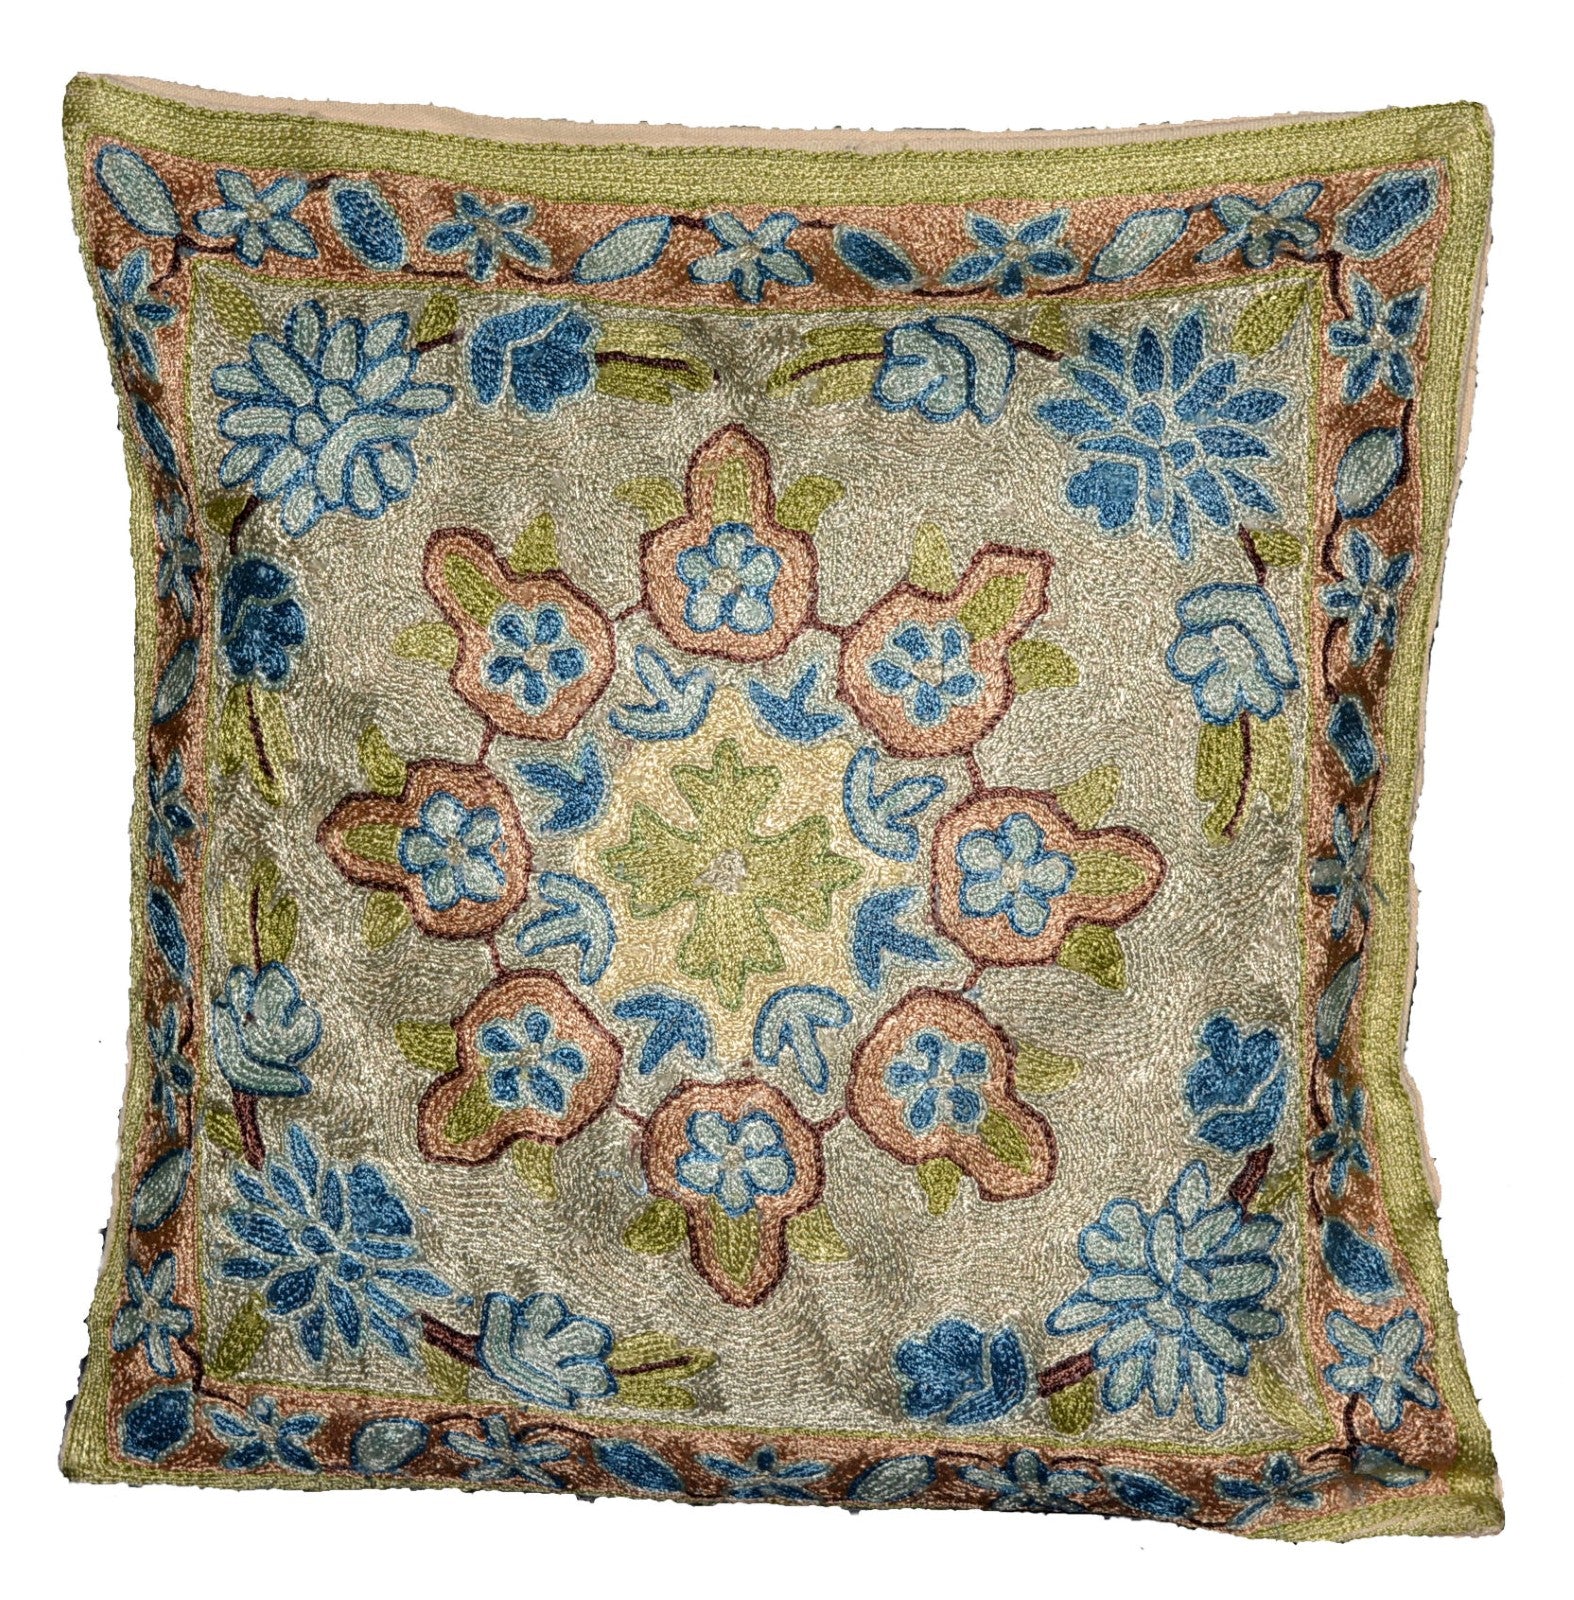 Crewel Silk Embroidered Cushion Throw Pillow Cover, Multicolor #CW2004